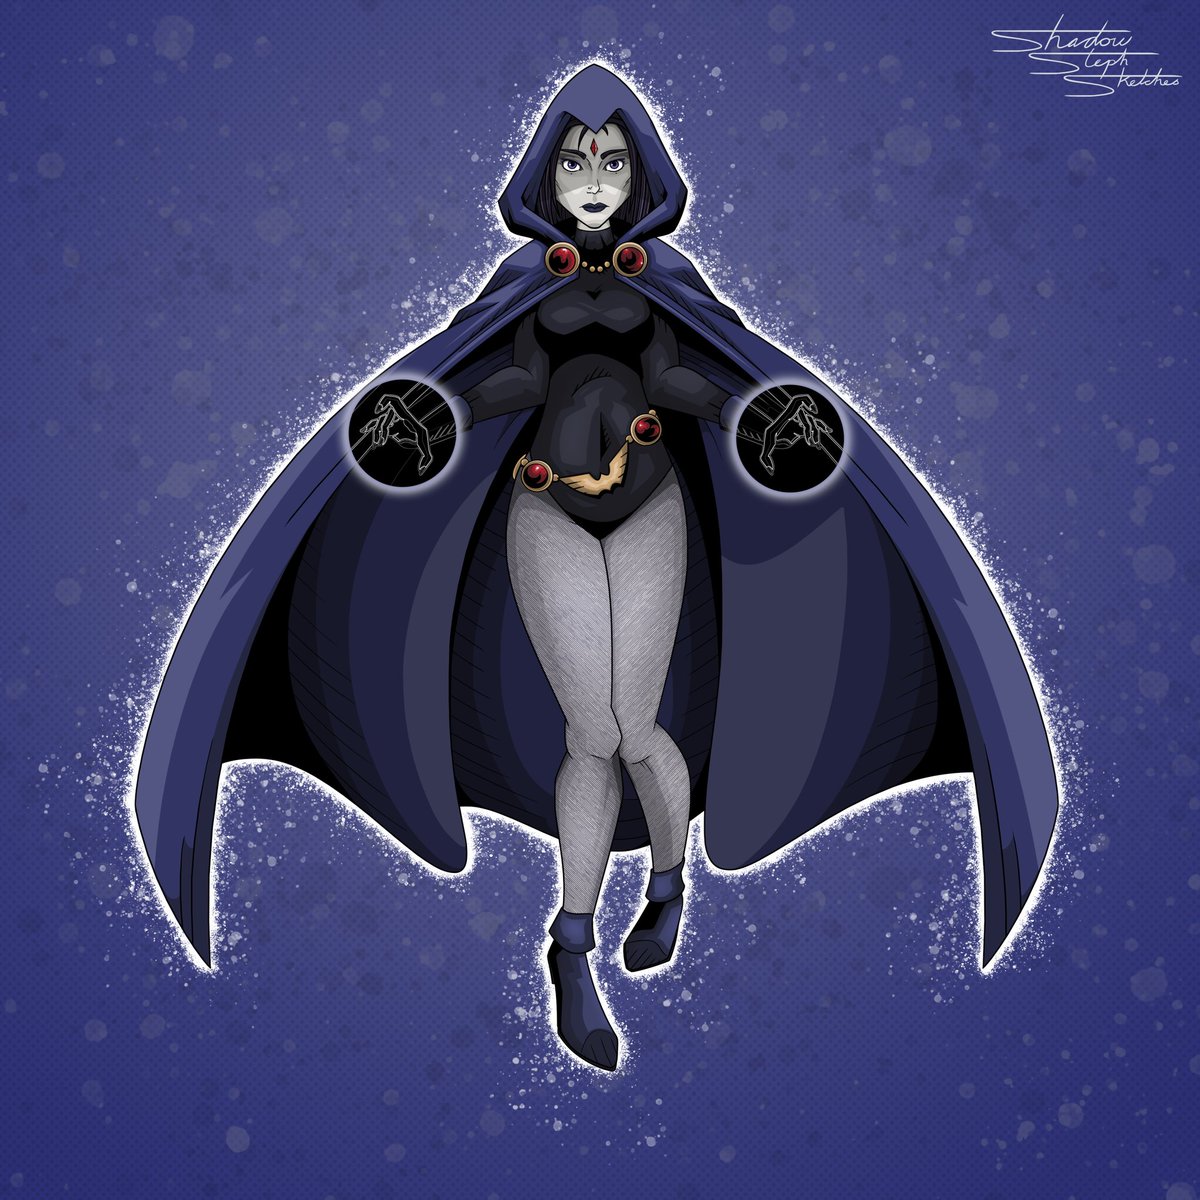 'Azarath Metrion Zinthos!'

The most powerful heroes hide the darkest secrets. Here's a quick sketch of Raven to prove herself amongst the titans.

#Raven #TeenTitans #TeenTitansRaven #TeenTitansGo #TitansGo #DC #DCComics #Titans #AzarathMetrionZinthos #DCSuperheroes #DigitalArt